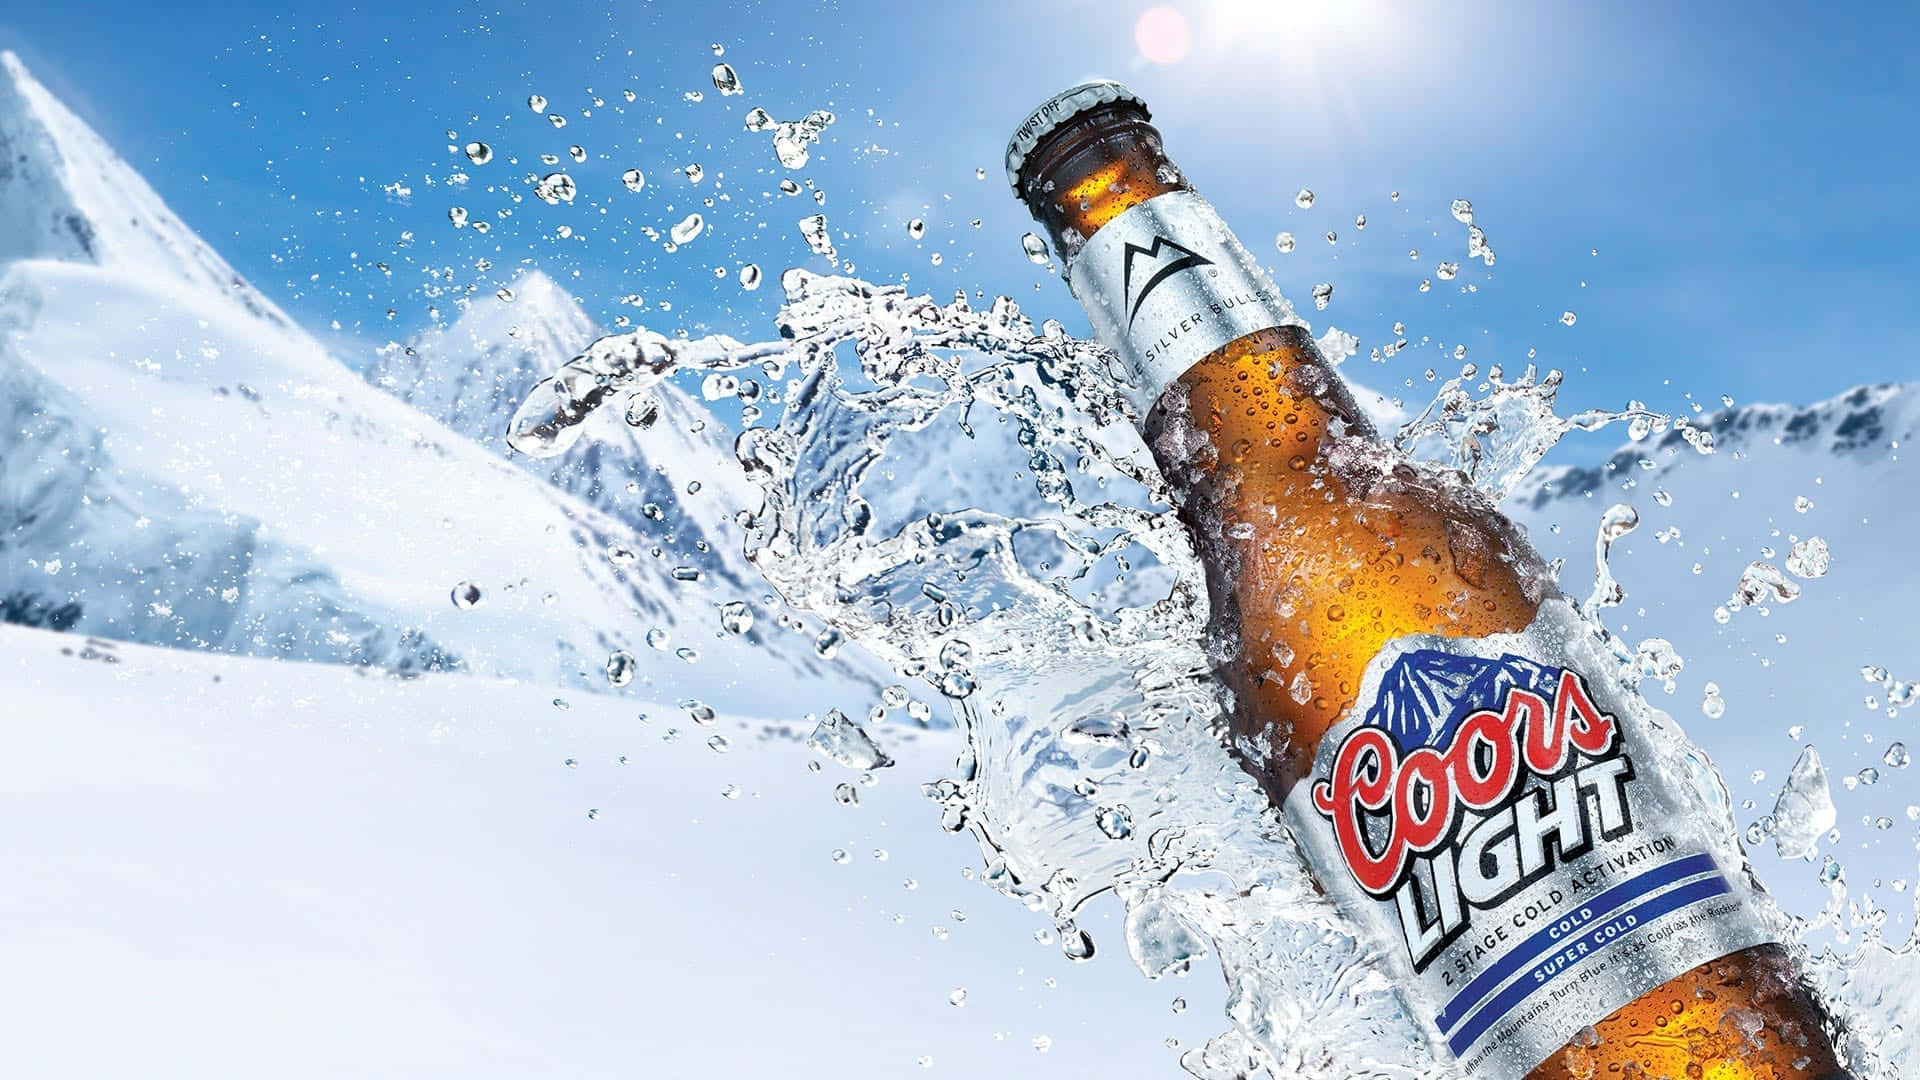 Coors Light unveils “Made to Chill” campaign